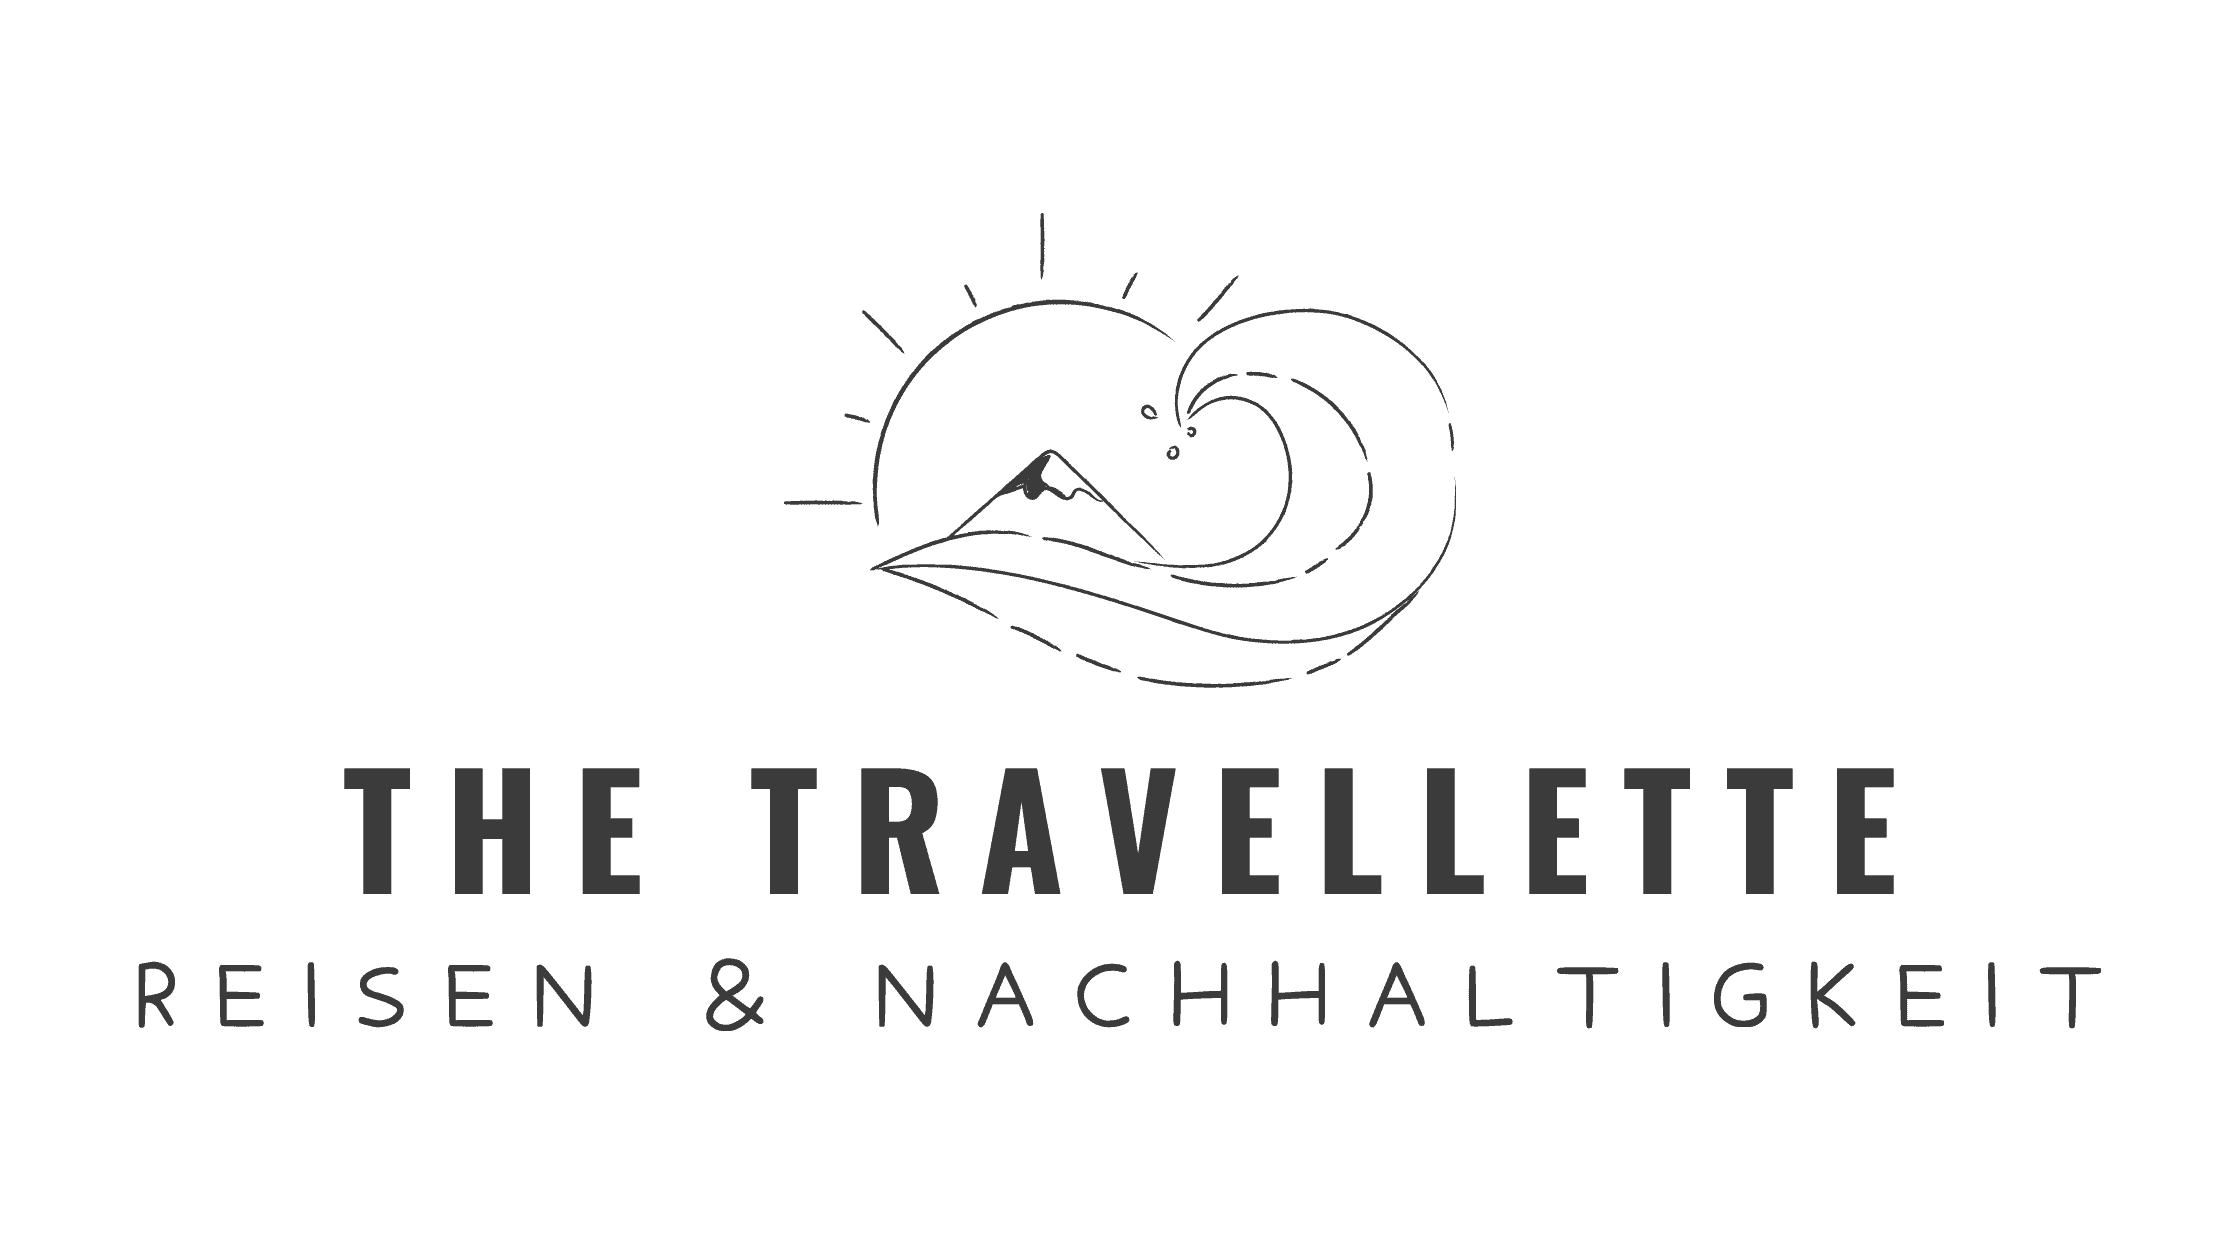 The Travellette